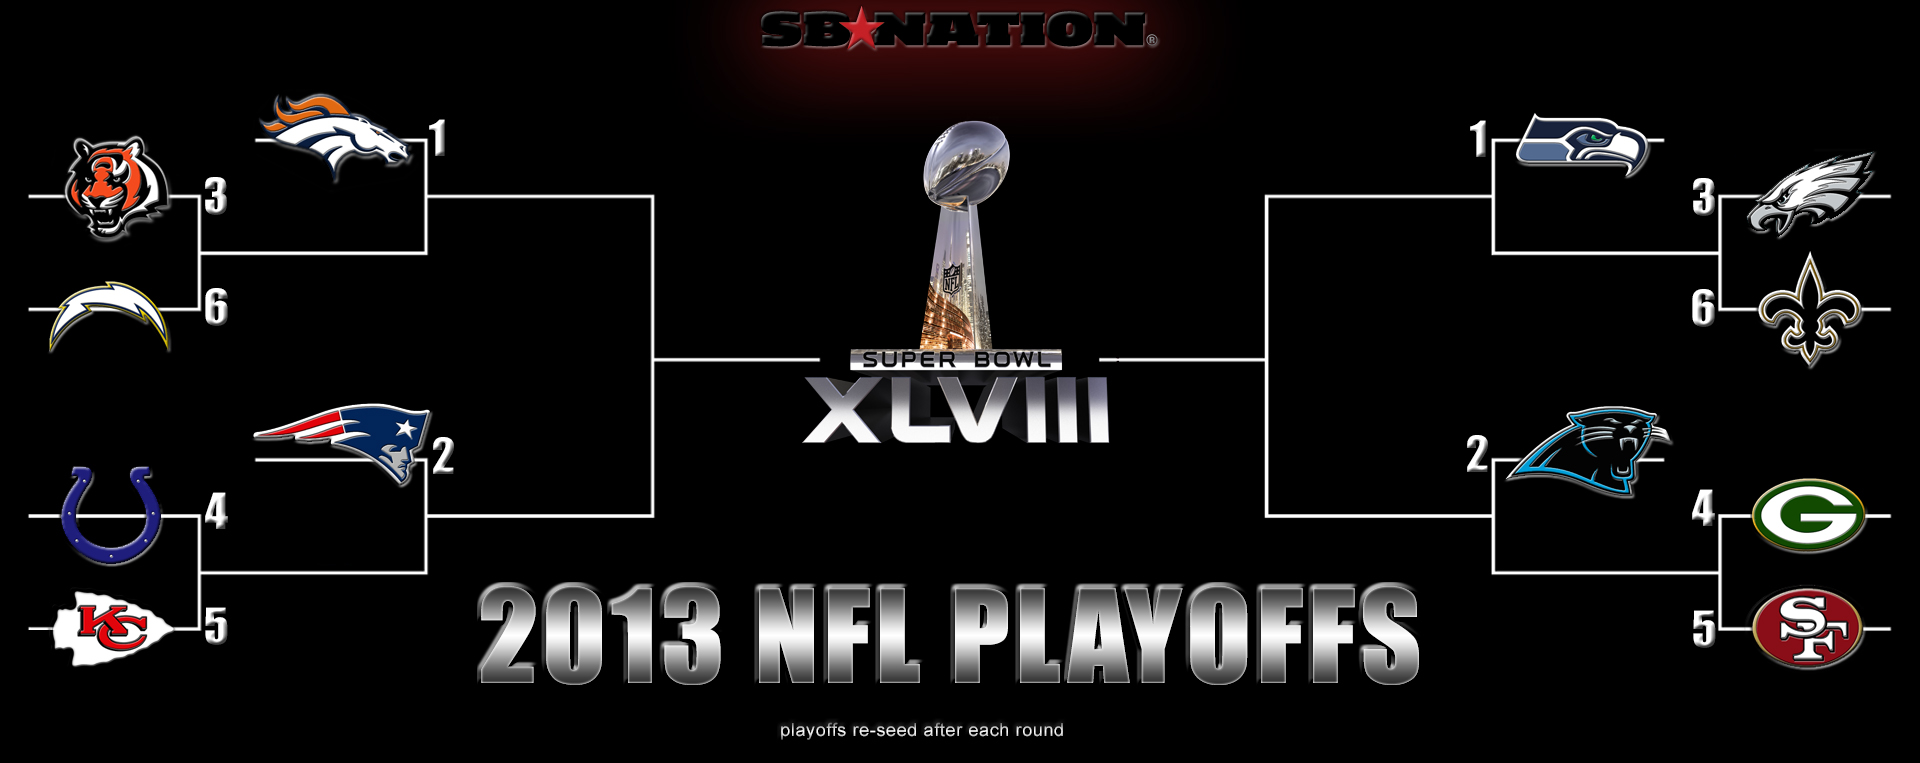 NFL playoff schedule 2014: Postseason play starts in Indianapolis 